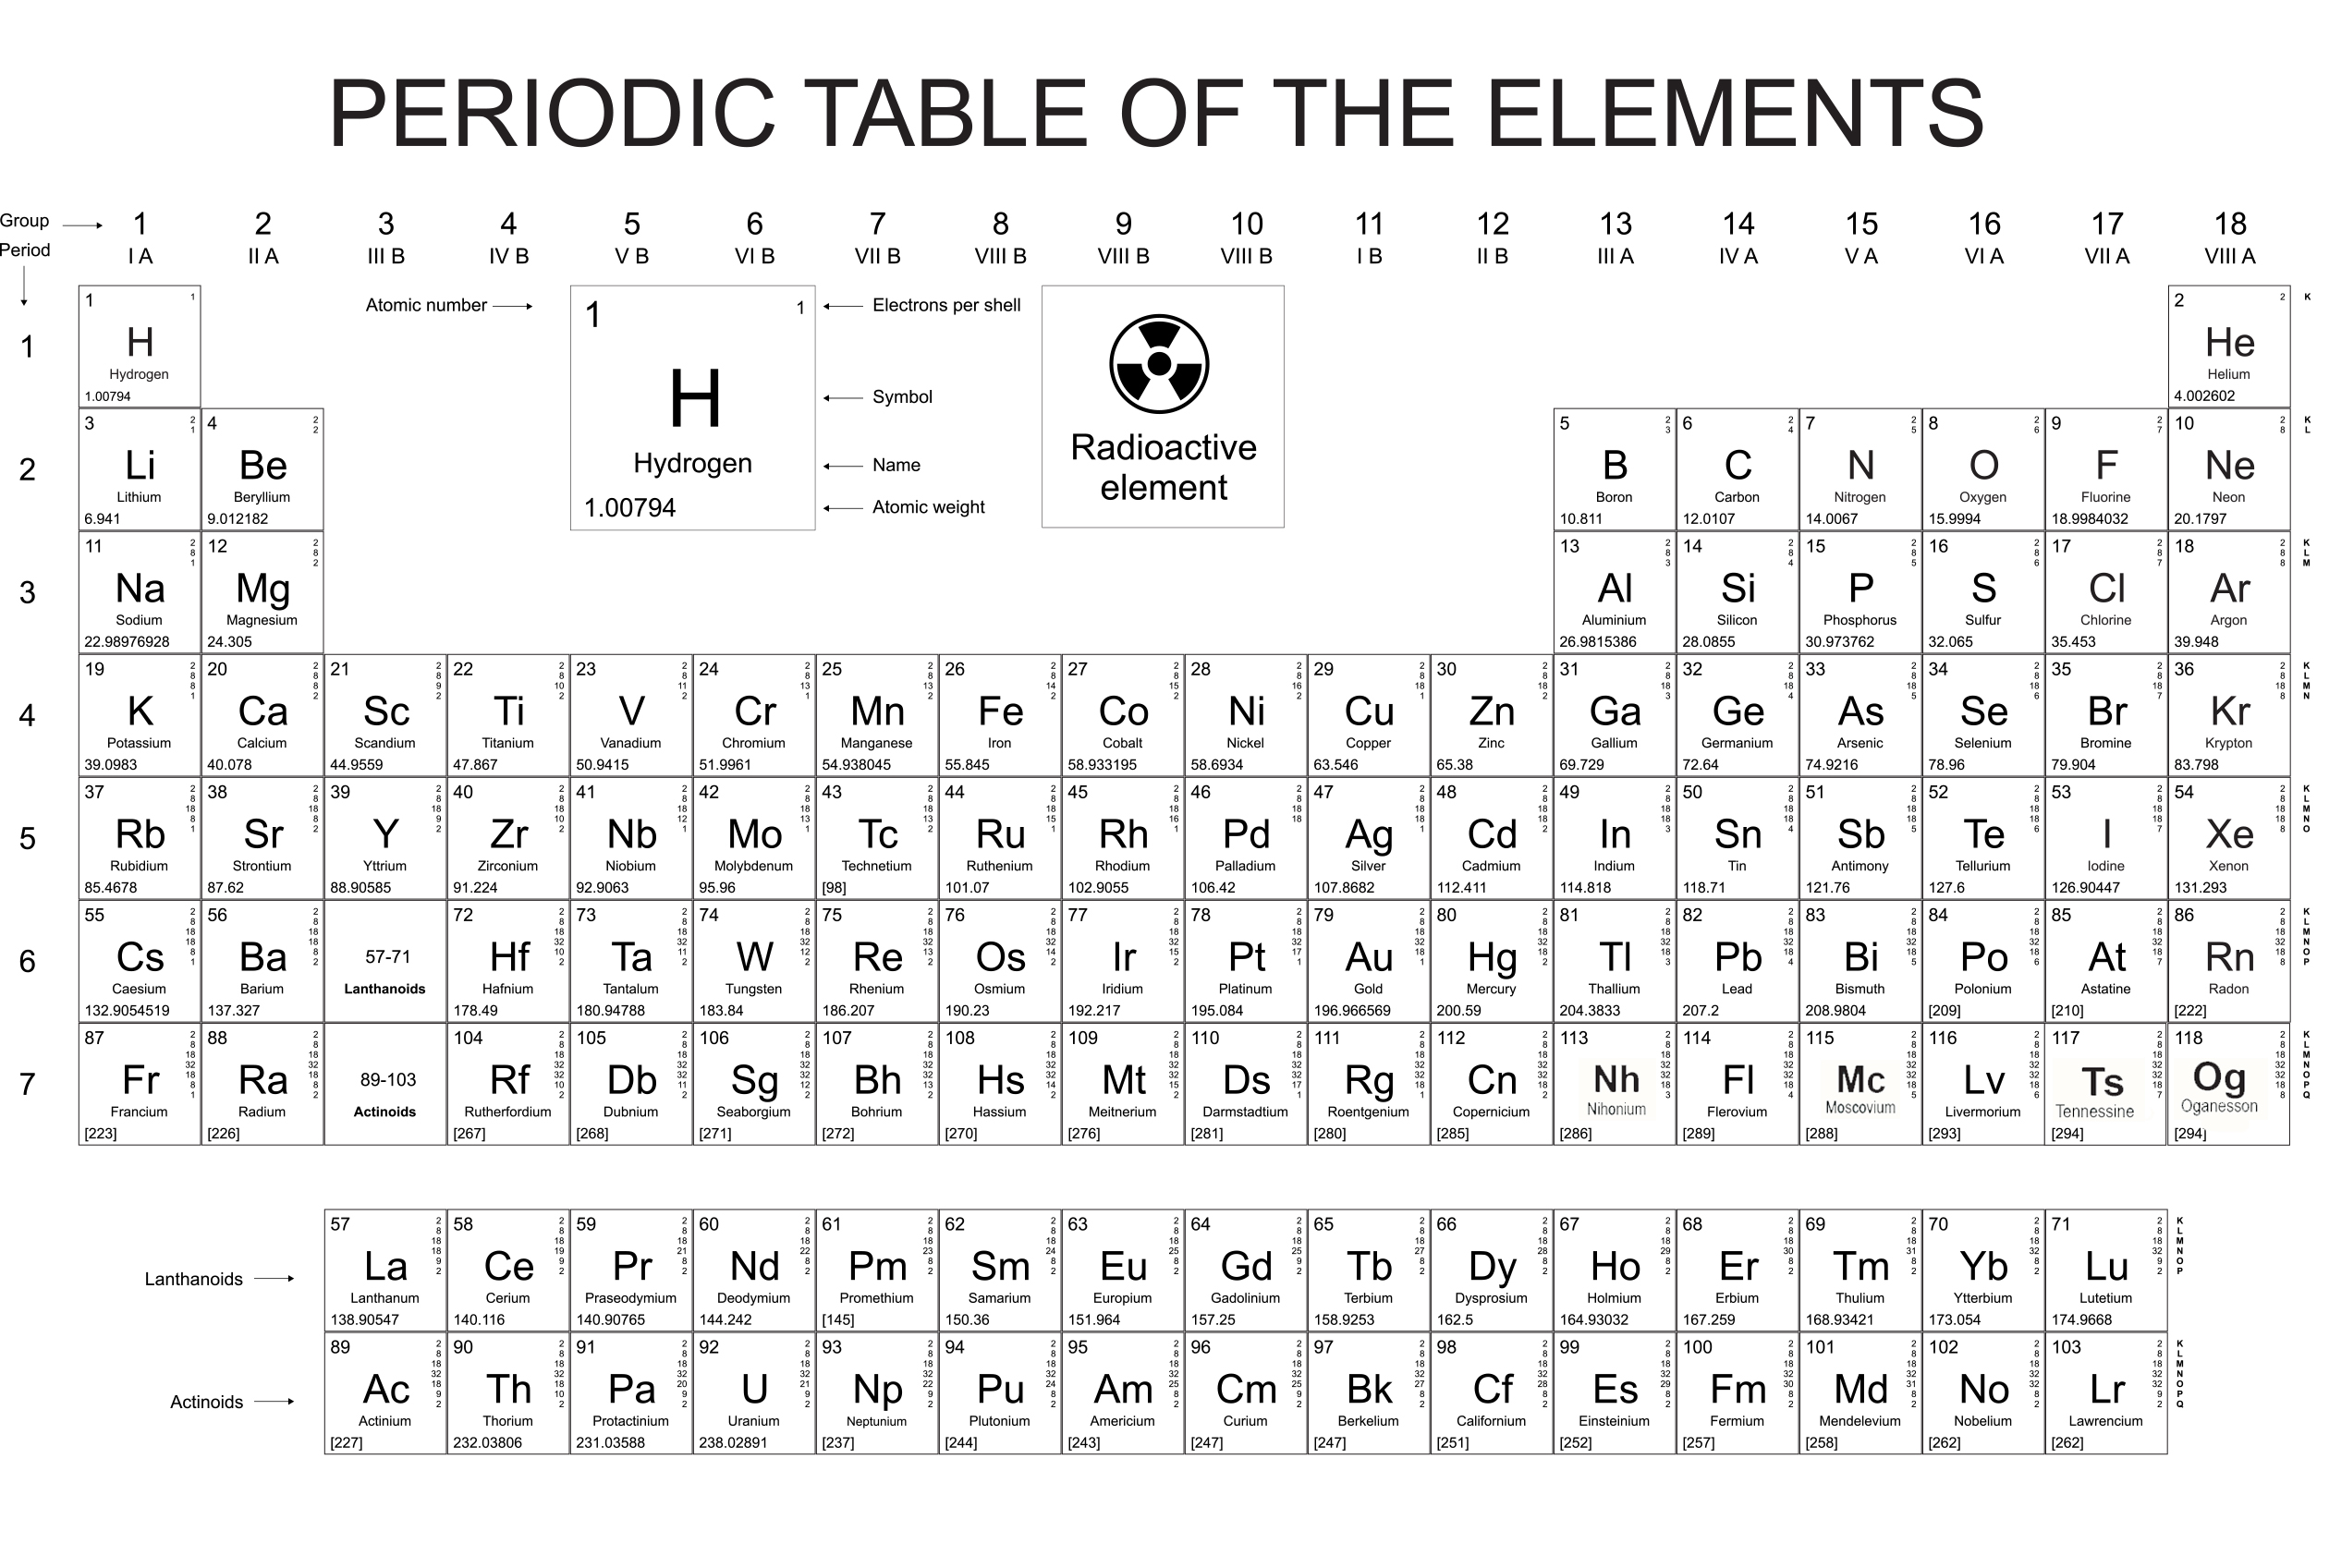 Periodic Table of the Elements Student Worksheet, consisting of the title: Periodic Table – Identify the Radioactive Isotopes, and the words: Find those elements that are radioactive isotopes and circle the element on the chart. The periodic table is a tabular arrangement of the chemical elements, ordered by their atomic number (number of protons in the nucleus), electron configurations, and recurring chemical properties.